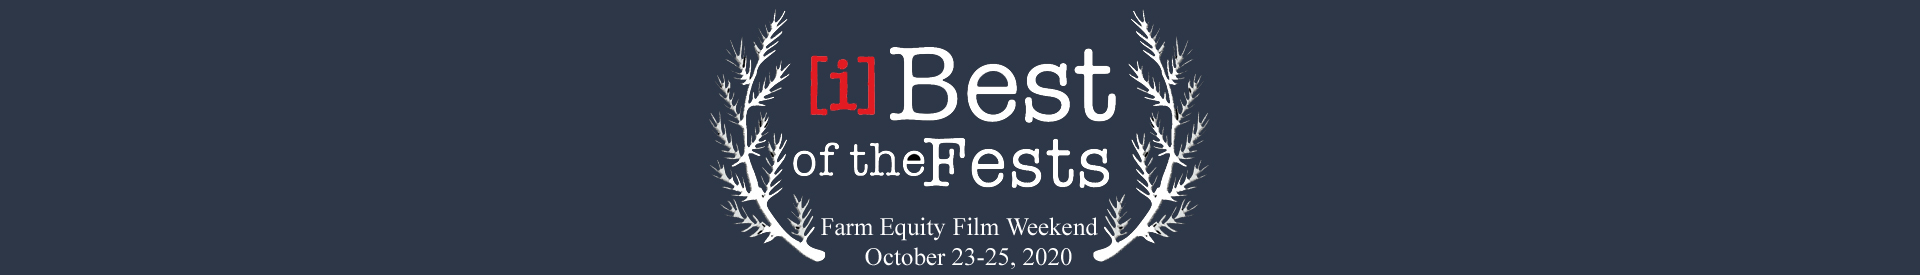 The Best of the Fests:  BLACK VOICES, A Two-Film Screening
Feb 12-28, 2021